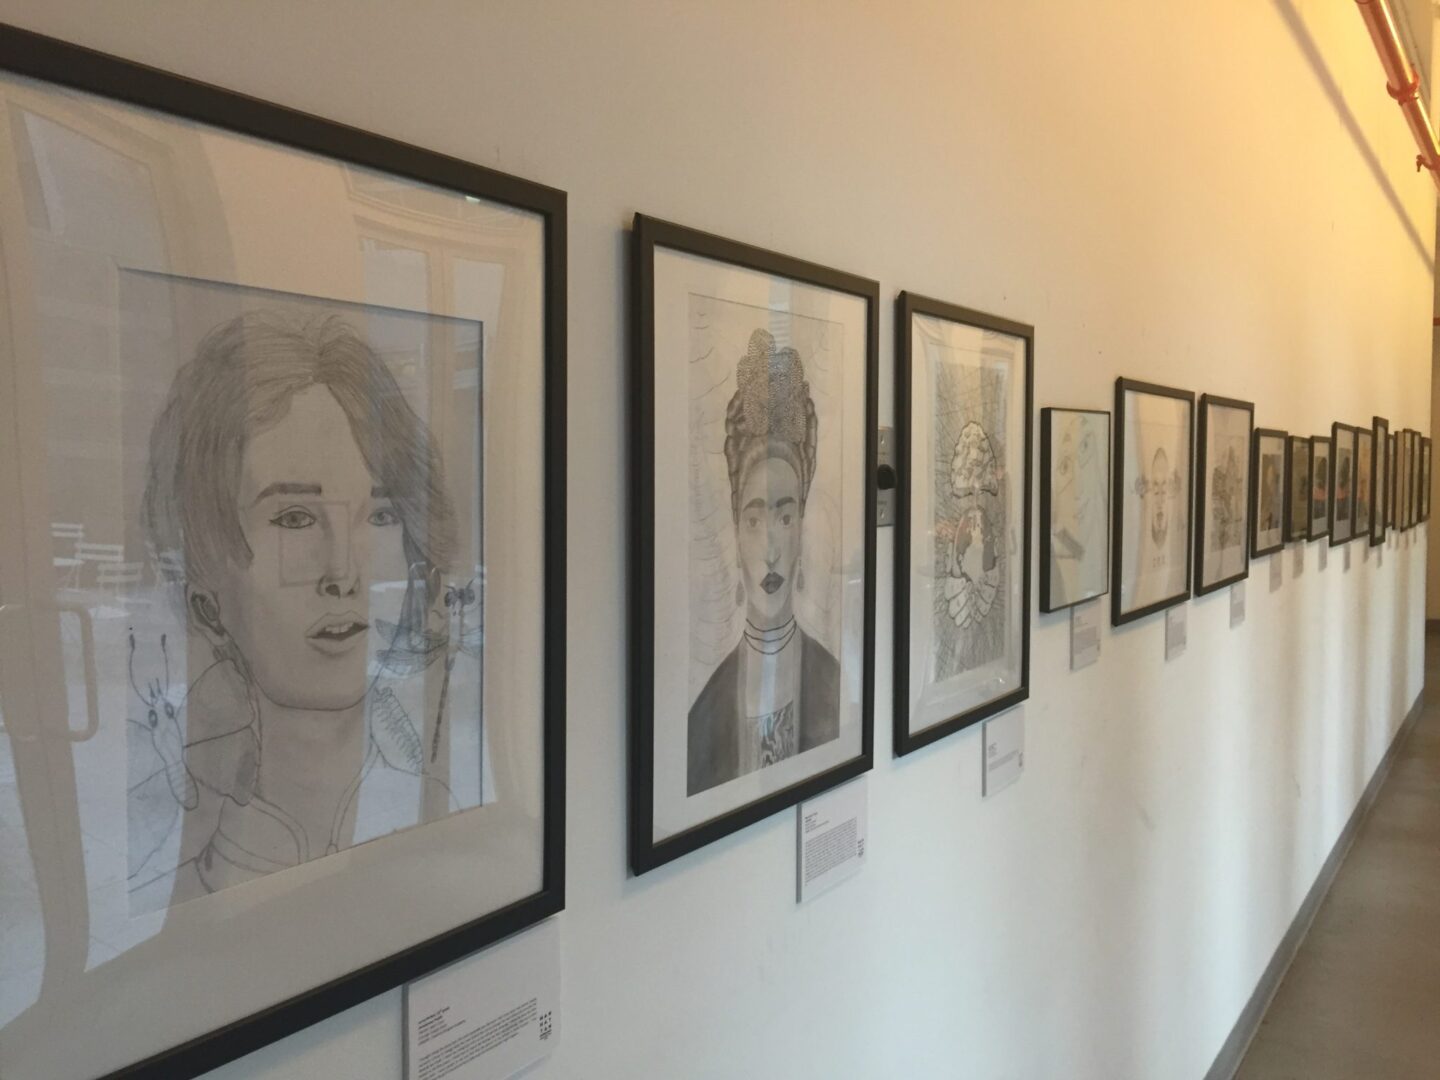 A line of framed drawings on a wall.